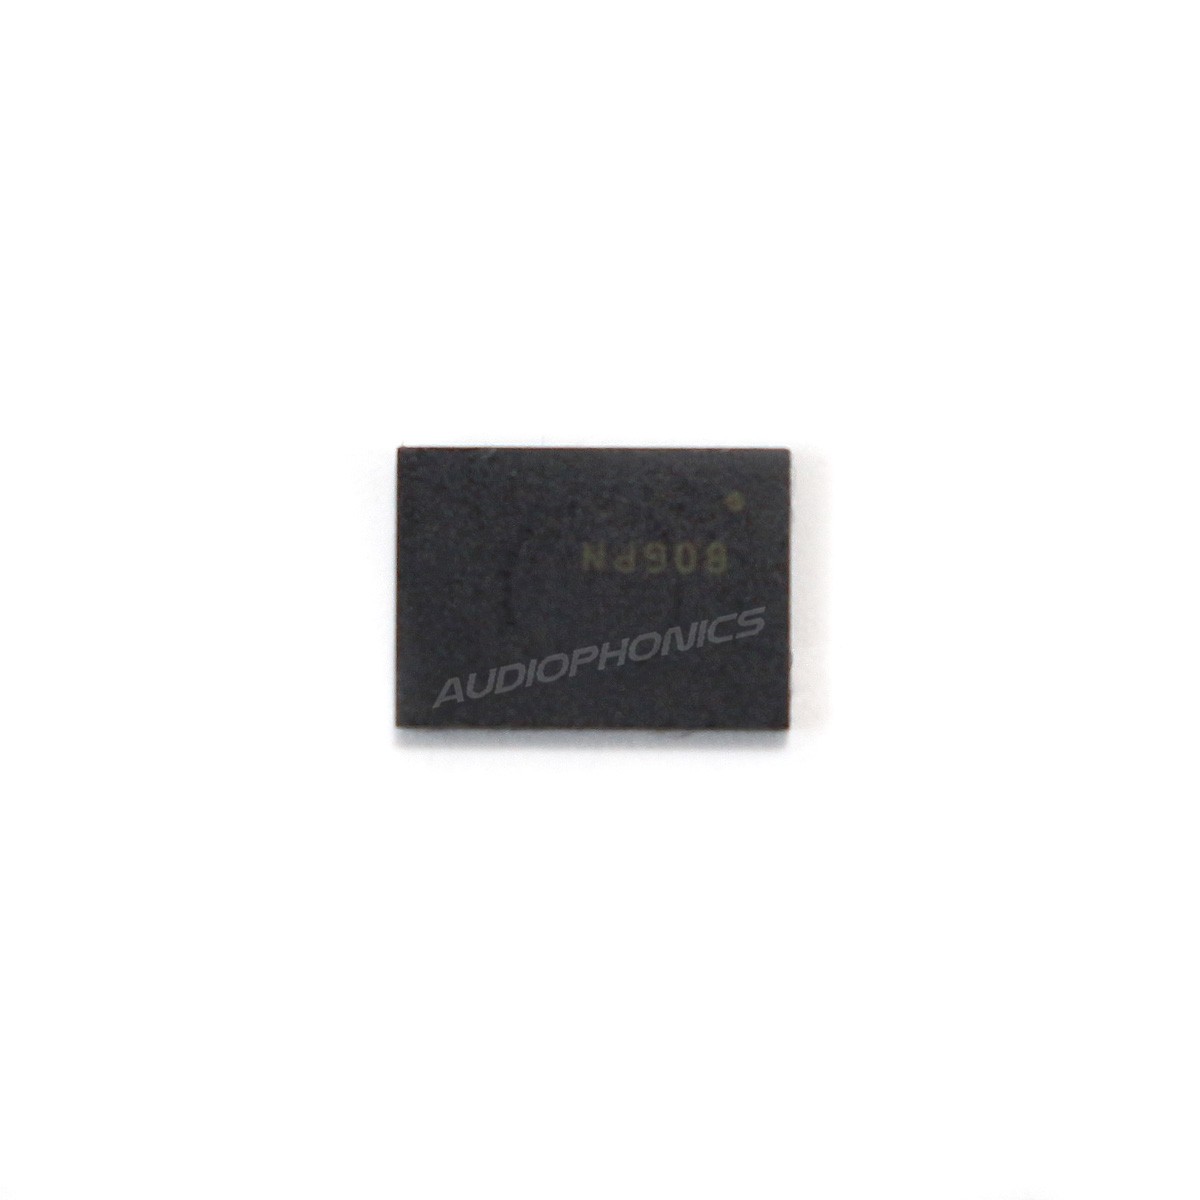 SIT8209 High Frequency Clock 100MHz 3.3V 20ppm LVCMOS